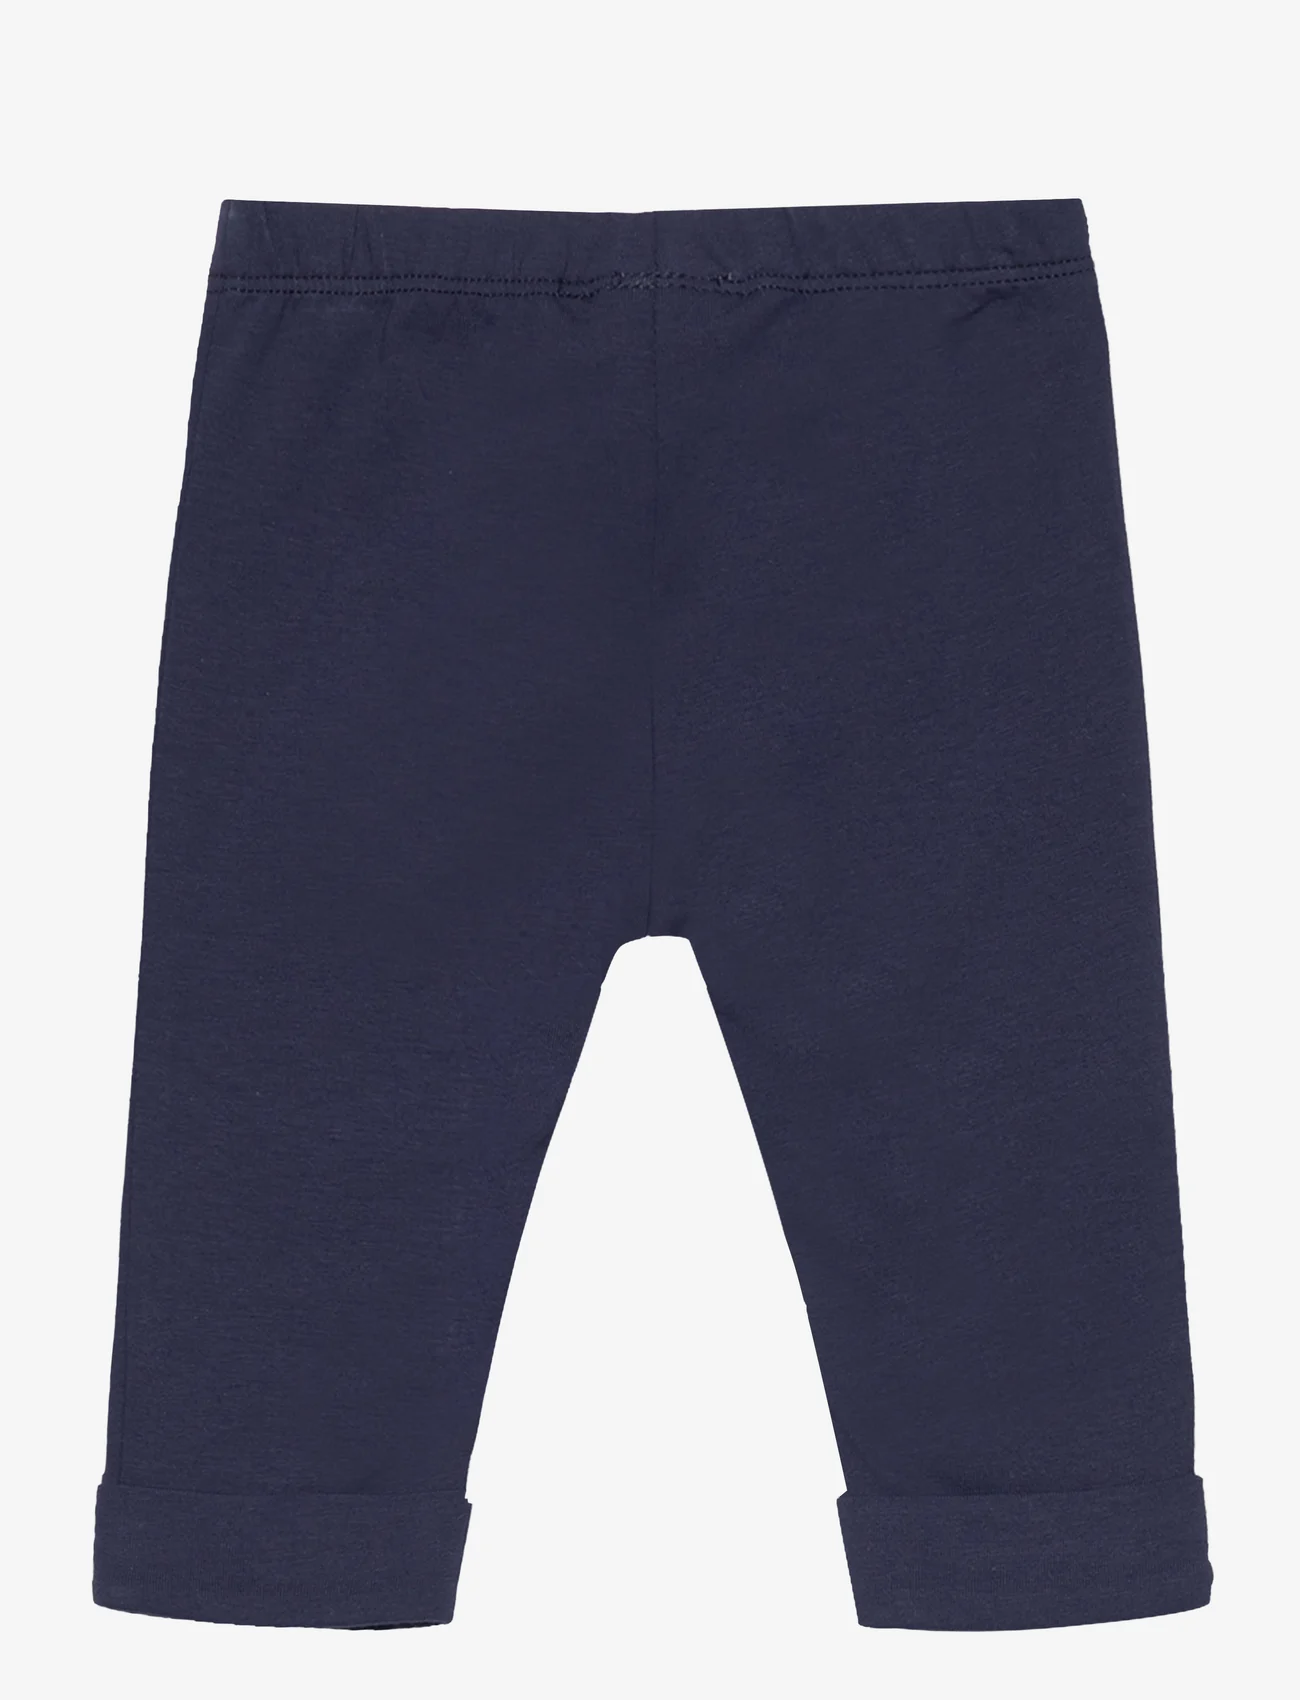 United Colors of Benetton - TROUSERS - spodenki niemowlęce - night blue - 1